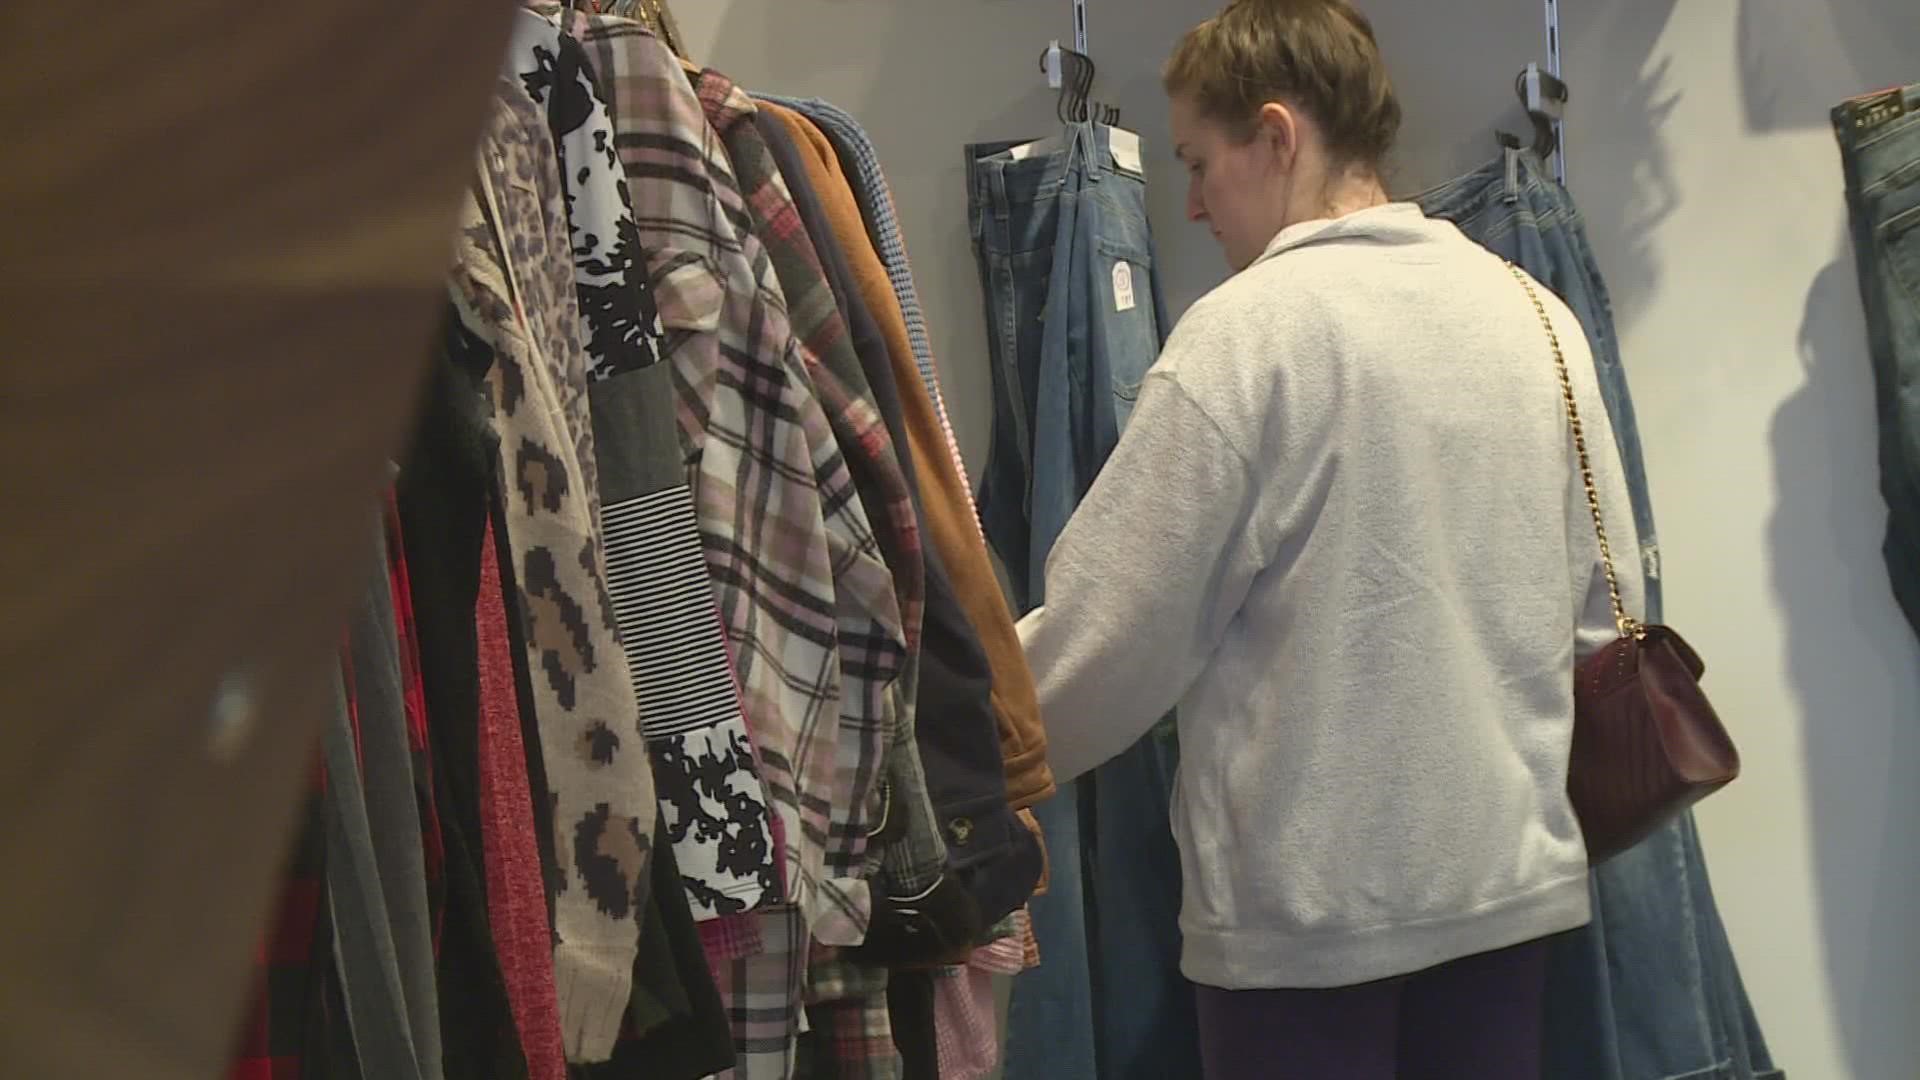 Holiday shopper kept filling Triad businesses through Thanksgiving weekend.